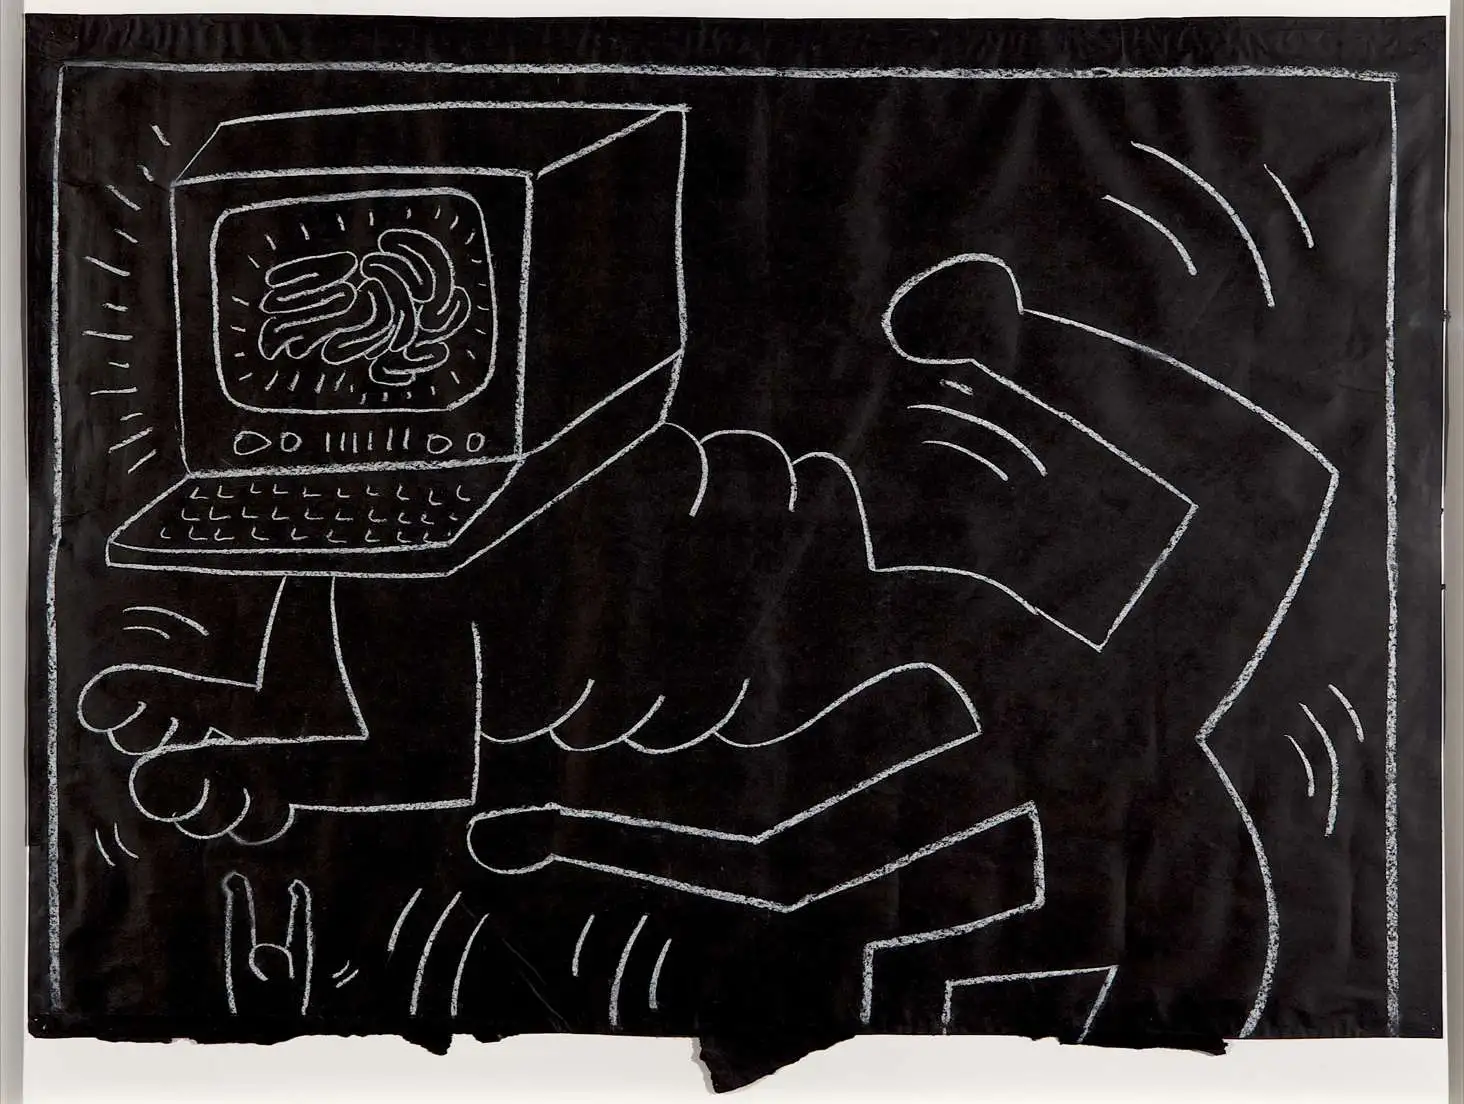 Untitled (computer head), ca. 1980 - 1983, chalk on black paper, 34.5” x 45”Collection of Larry WarshKeith Haring artwork © Keith Haring Foundation. Photo credit: Aaron Igler, Greenhouse Media.